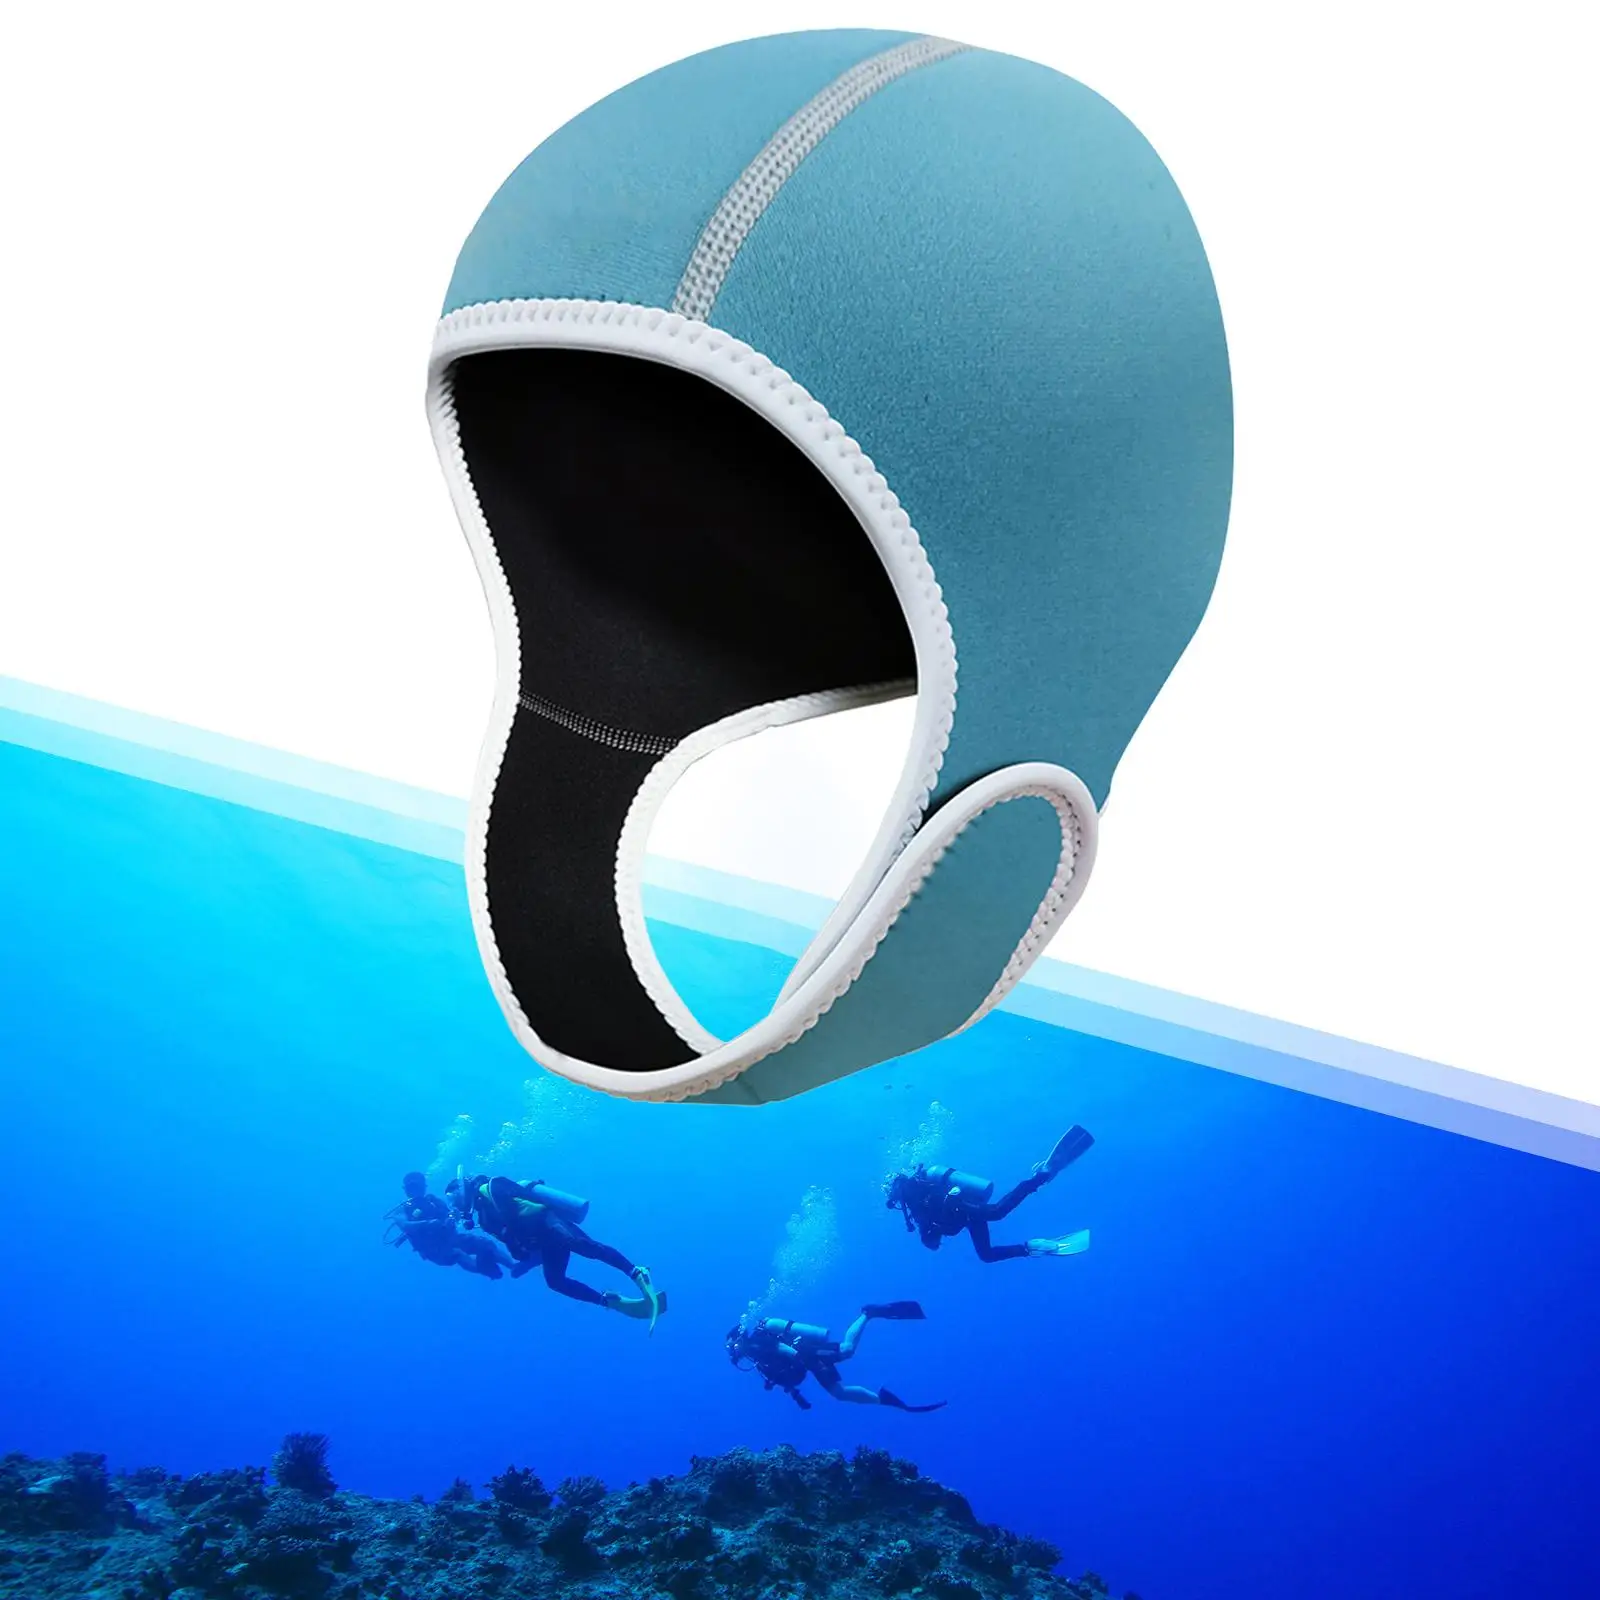 Scuba Diving Hood Head Protection Elastic with Chin Strap 2mm Neoprene Diving Wetsuit Hood for Women Men Surfing Rafting